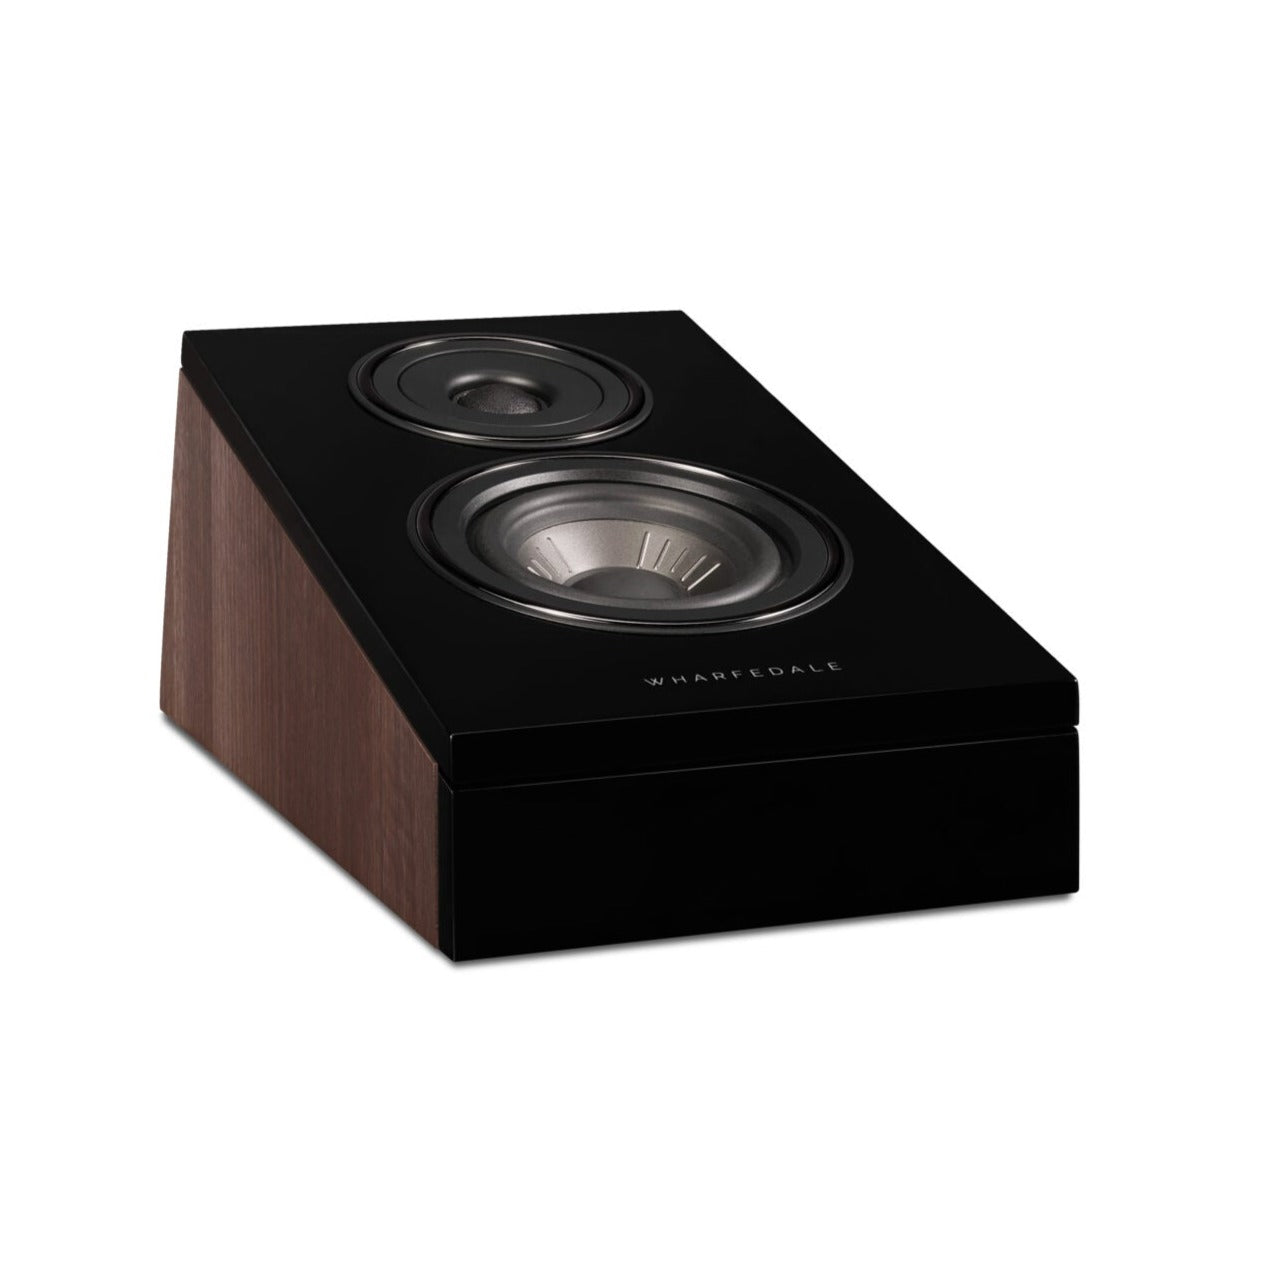 Since 1982, Wharfedale’s famous DIAMOND speakers have served as the classic entry point to true high-fidelity sound, their exceptional sonic value for money earning numerous ‘product of the year’ accolades in the UK and around the world. This autumn, with the introduction of the all-new DIAMOND 12 Series, Wharfedale once again raises the bar for affordable, high-performance loudspeakers.